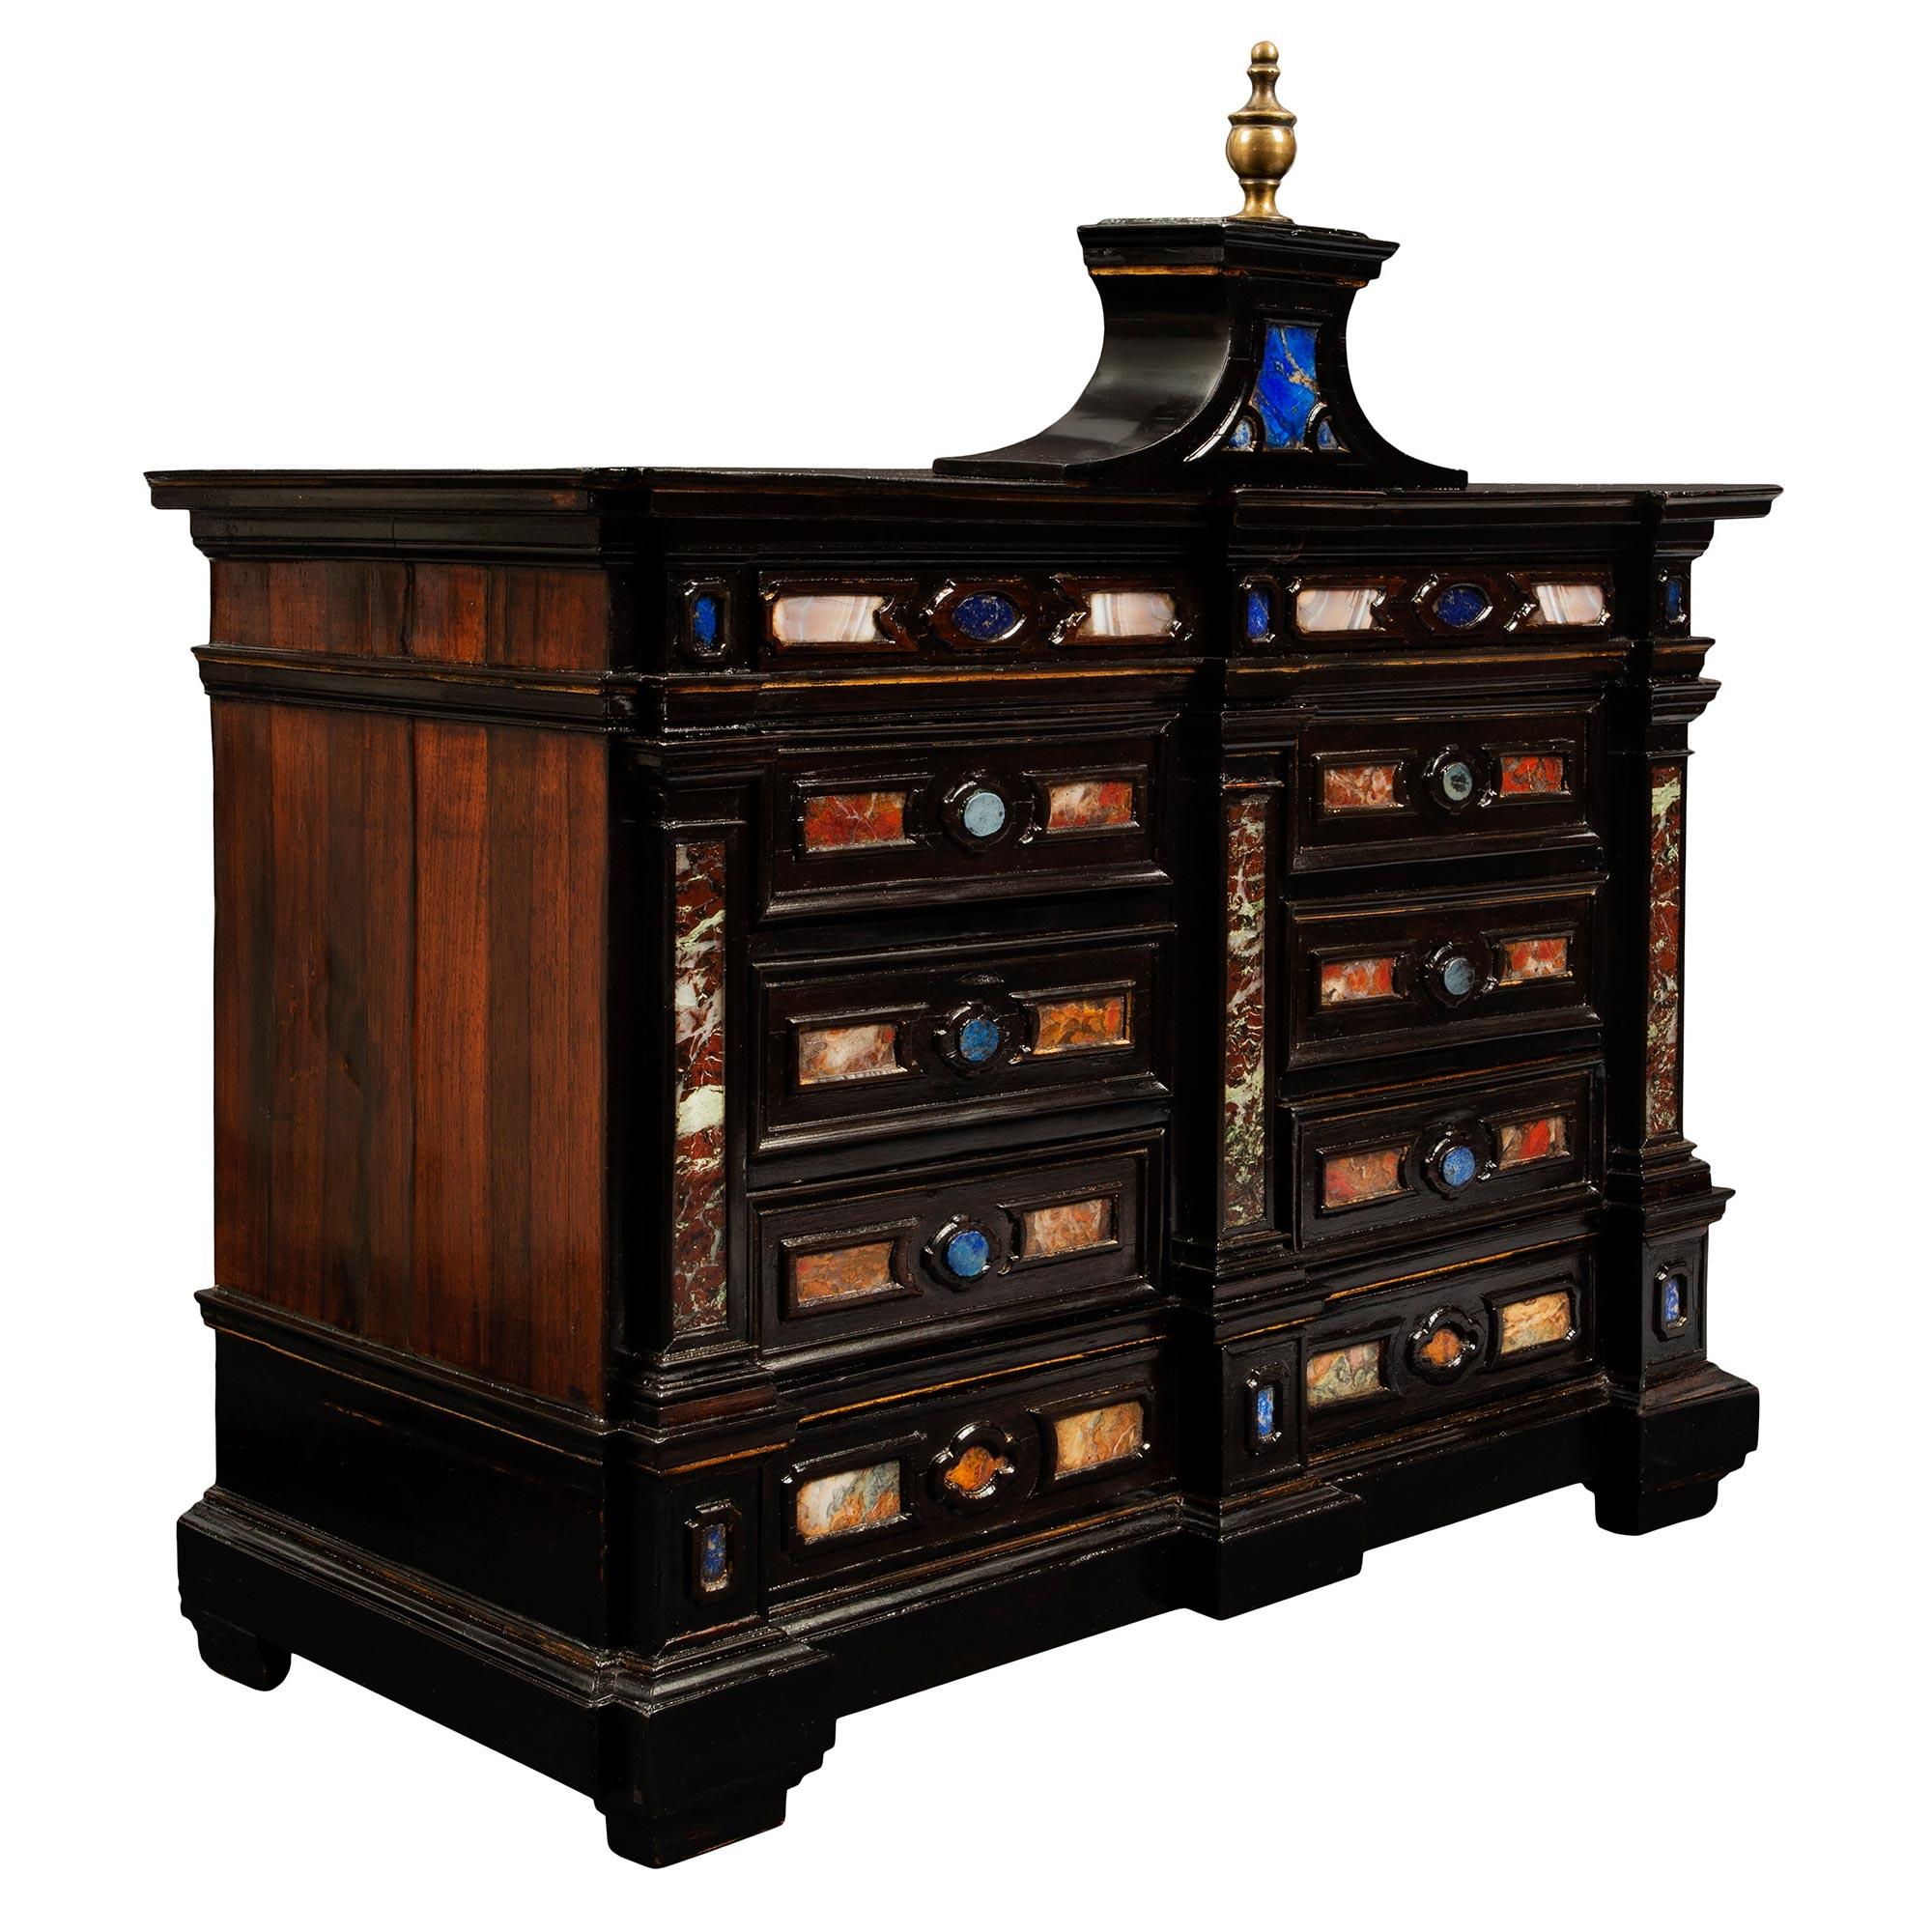 An exceptional and most unique Italian early 18th century Baroque period ebonized fruit wood and Pietra Dura marble and semi precious stone inlaid specimen cabinet. The small scale cabinet is raised by charming block feet below the mottled bottom